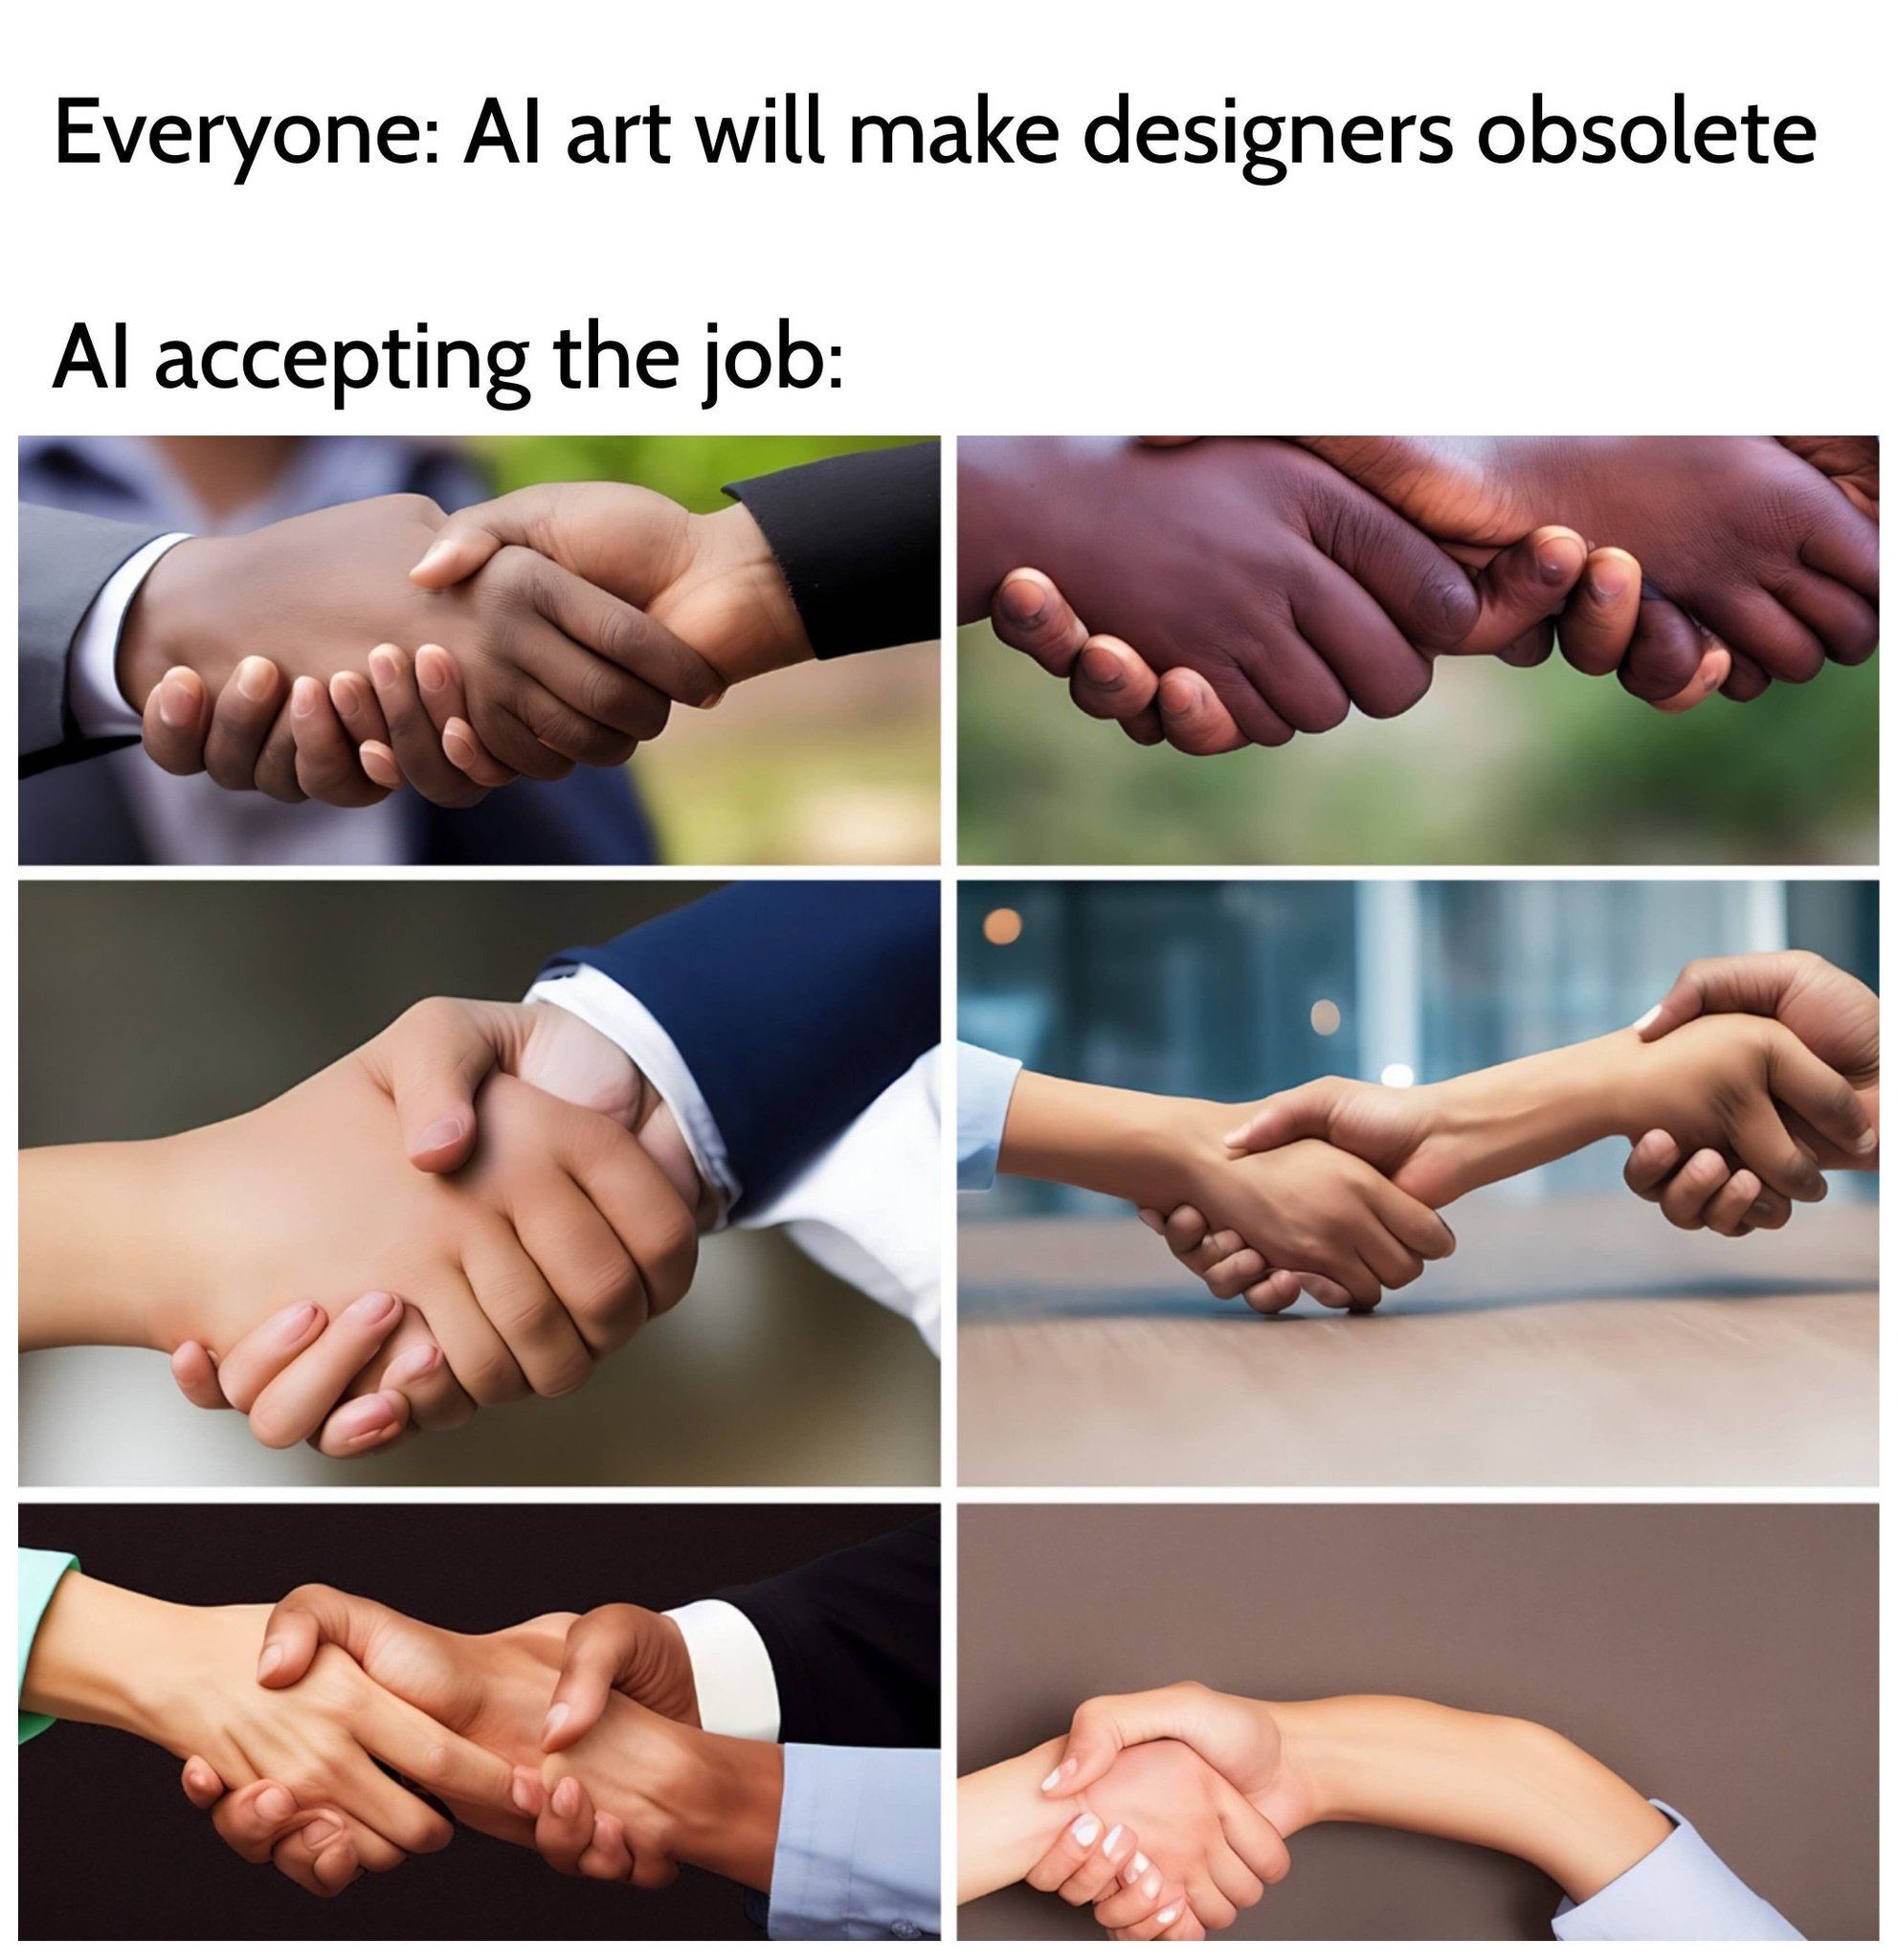 A funny AI art meme posted on a Stable Diffusion Discord server showing AI-generated mutant hands shaking hands.